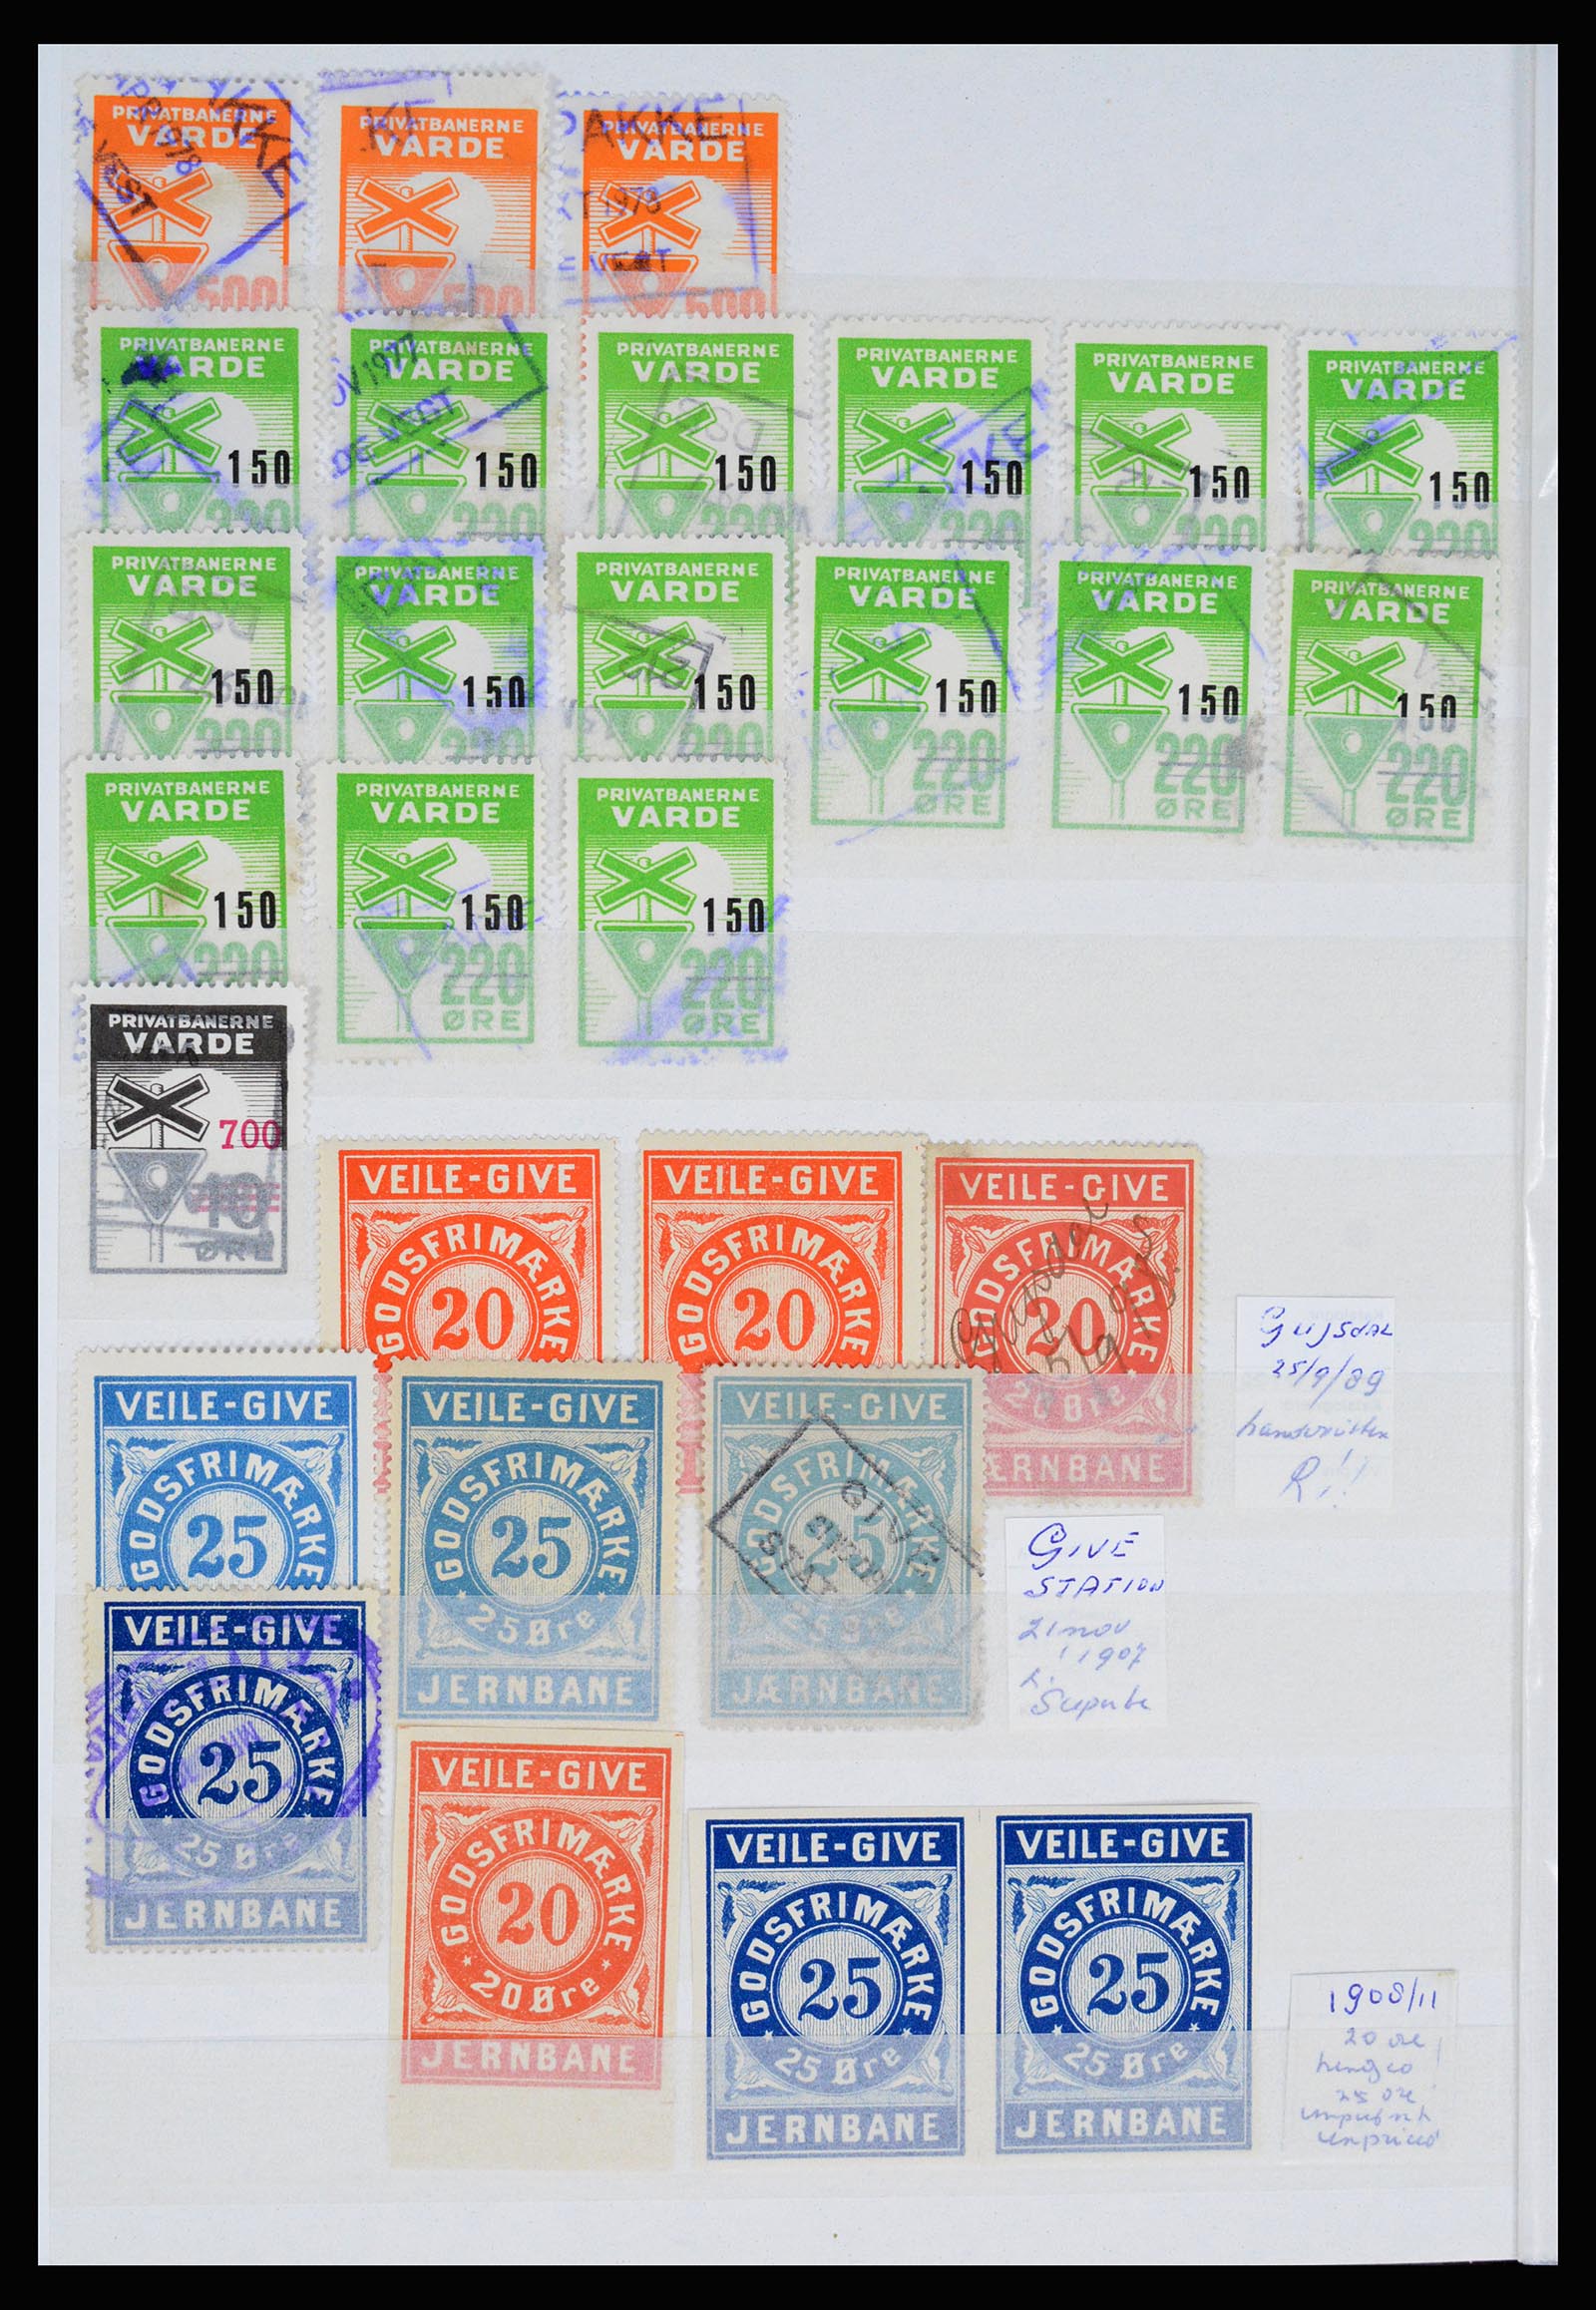 36982 133 - Stamp collection 36982 Denmark railroad stamps.